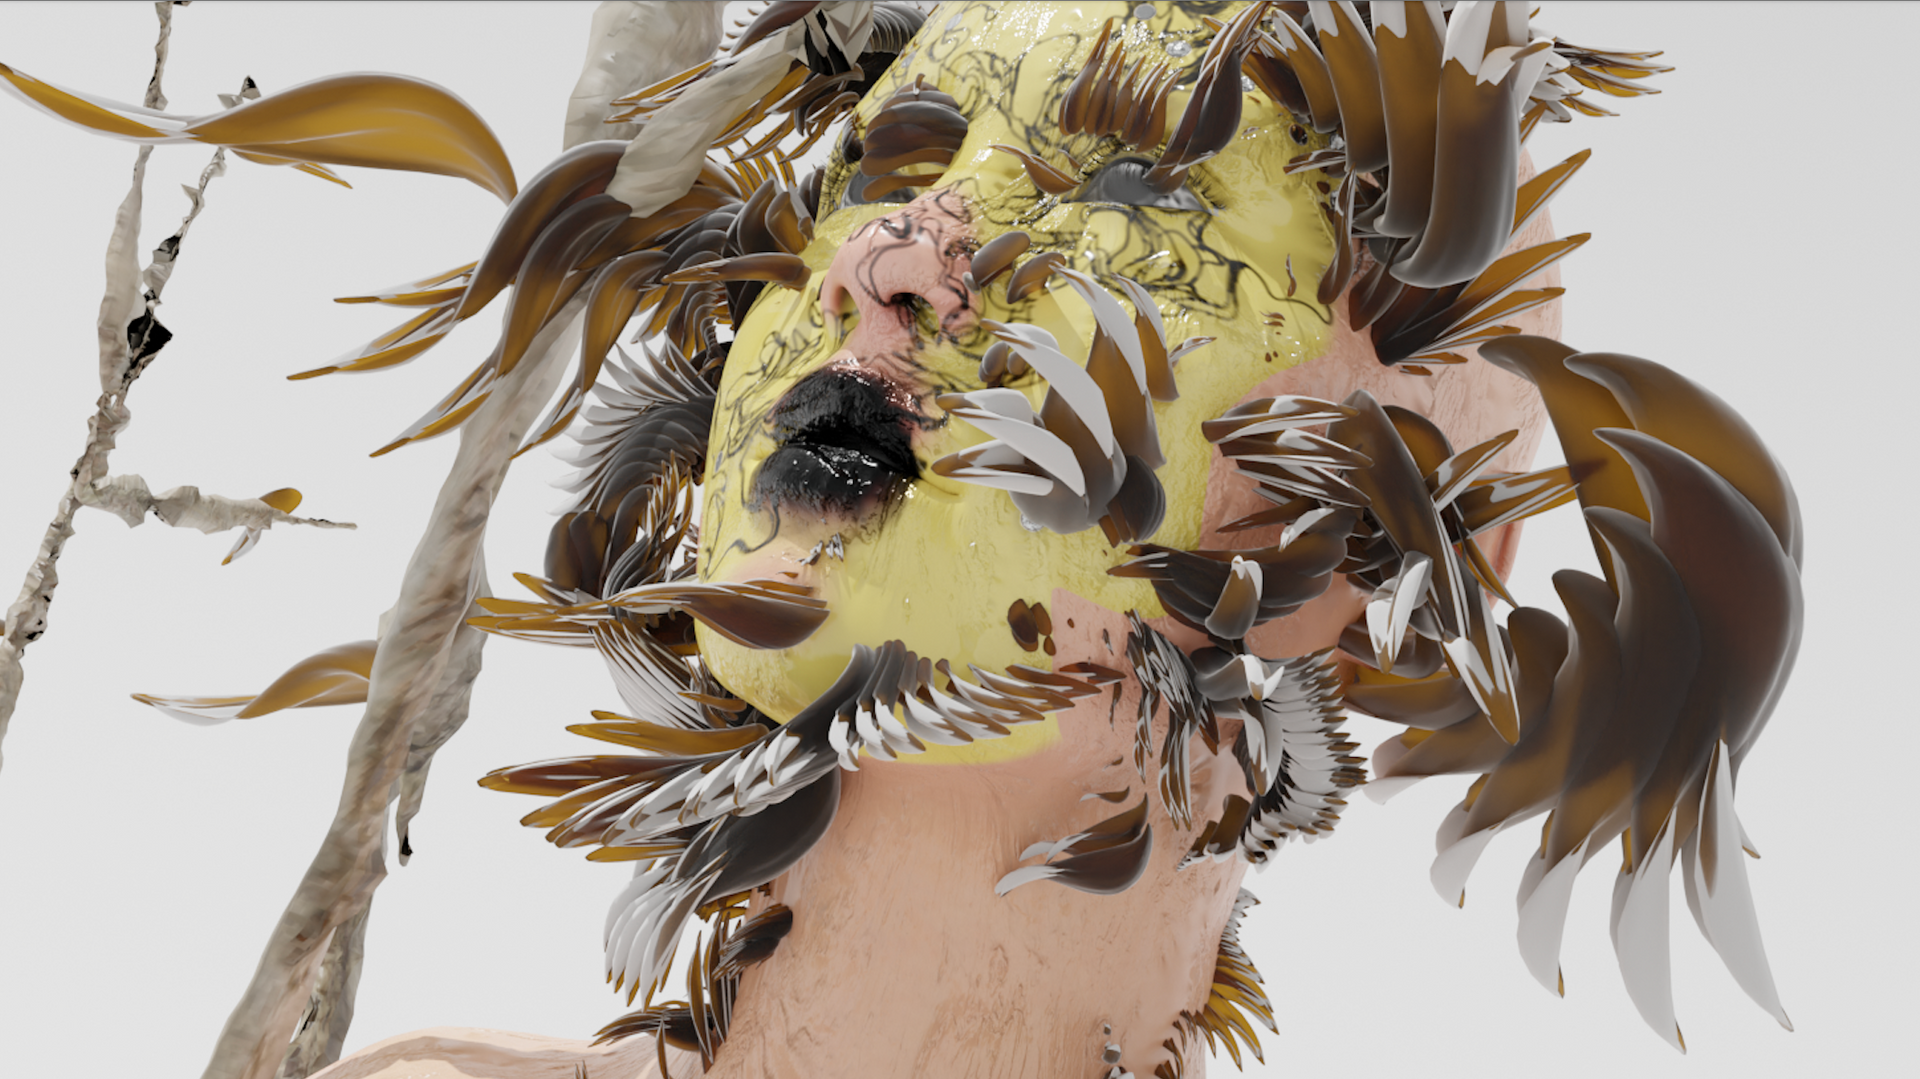 Digital image of female face, coloured yellow with black lips, digital bird feathers attached and floating away